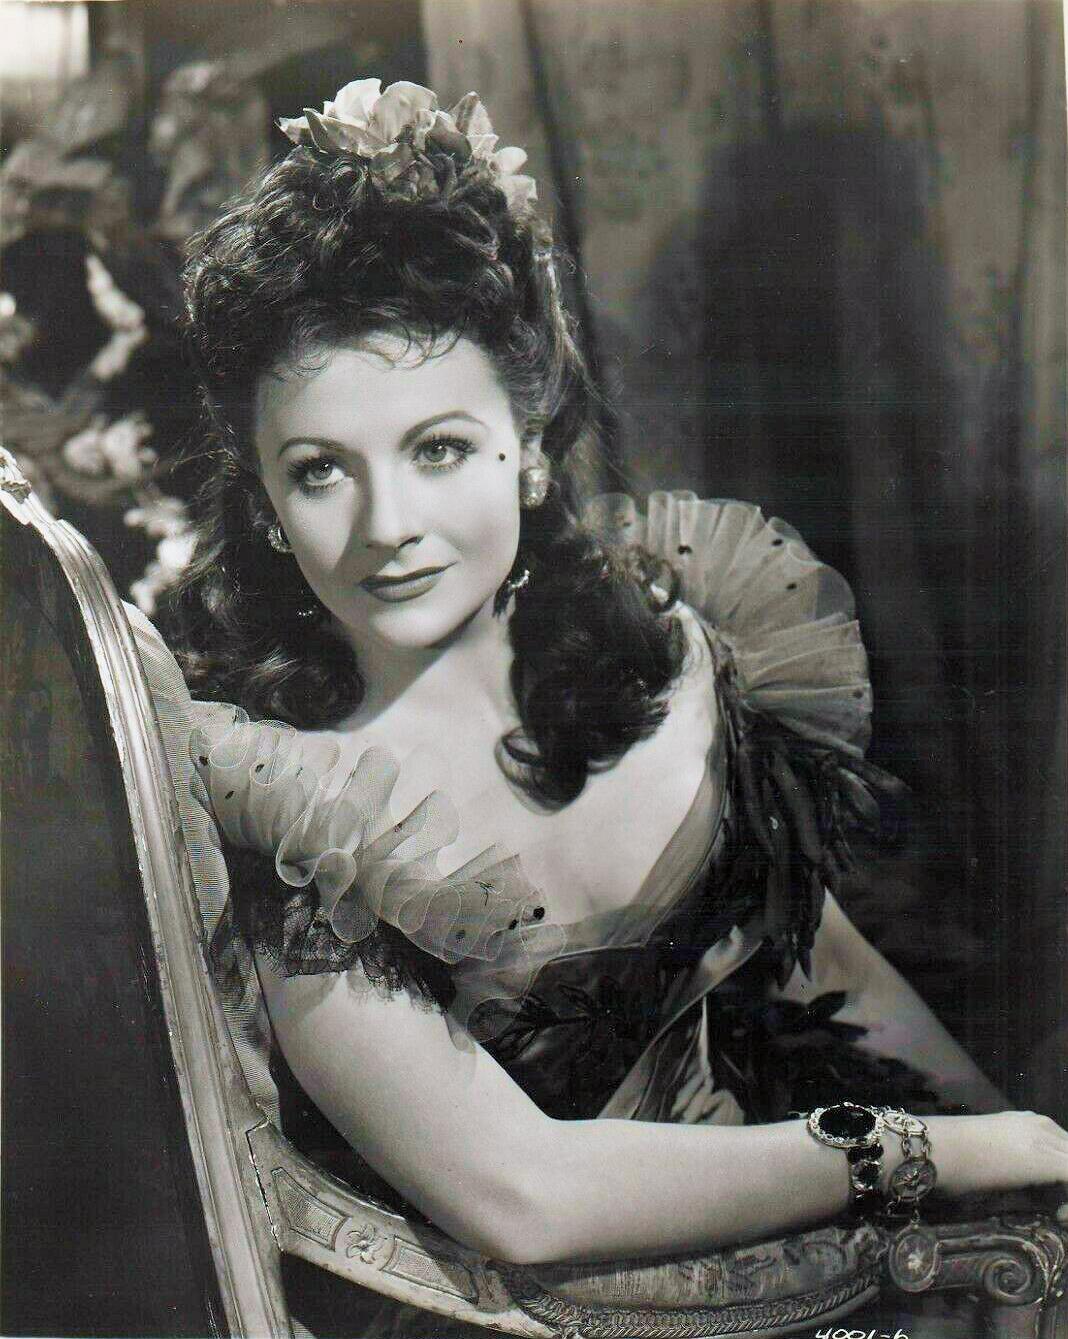 Photograph from Laughing Anne (1953) (20) featuring Margaret Lockwood